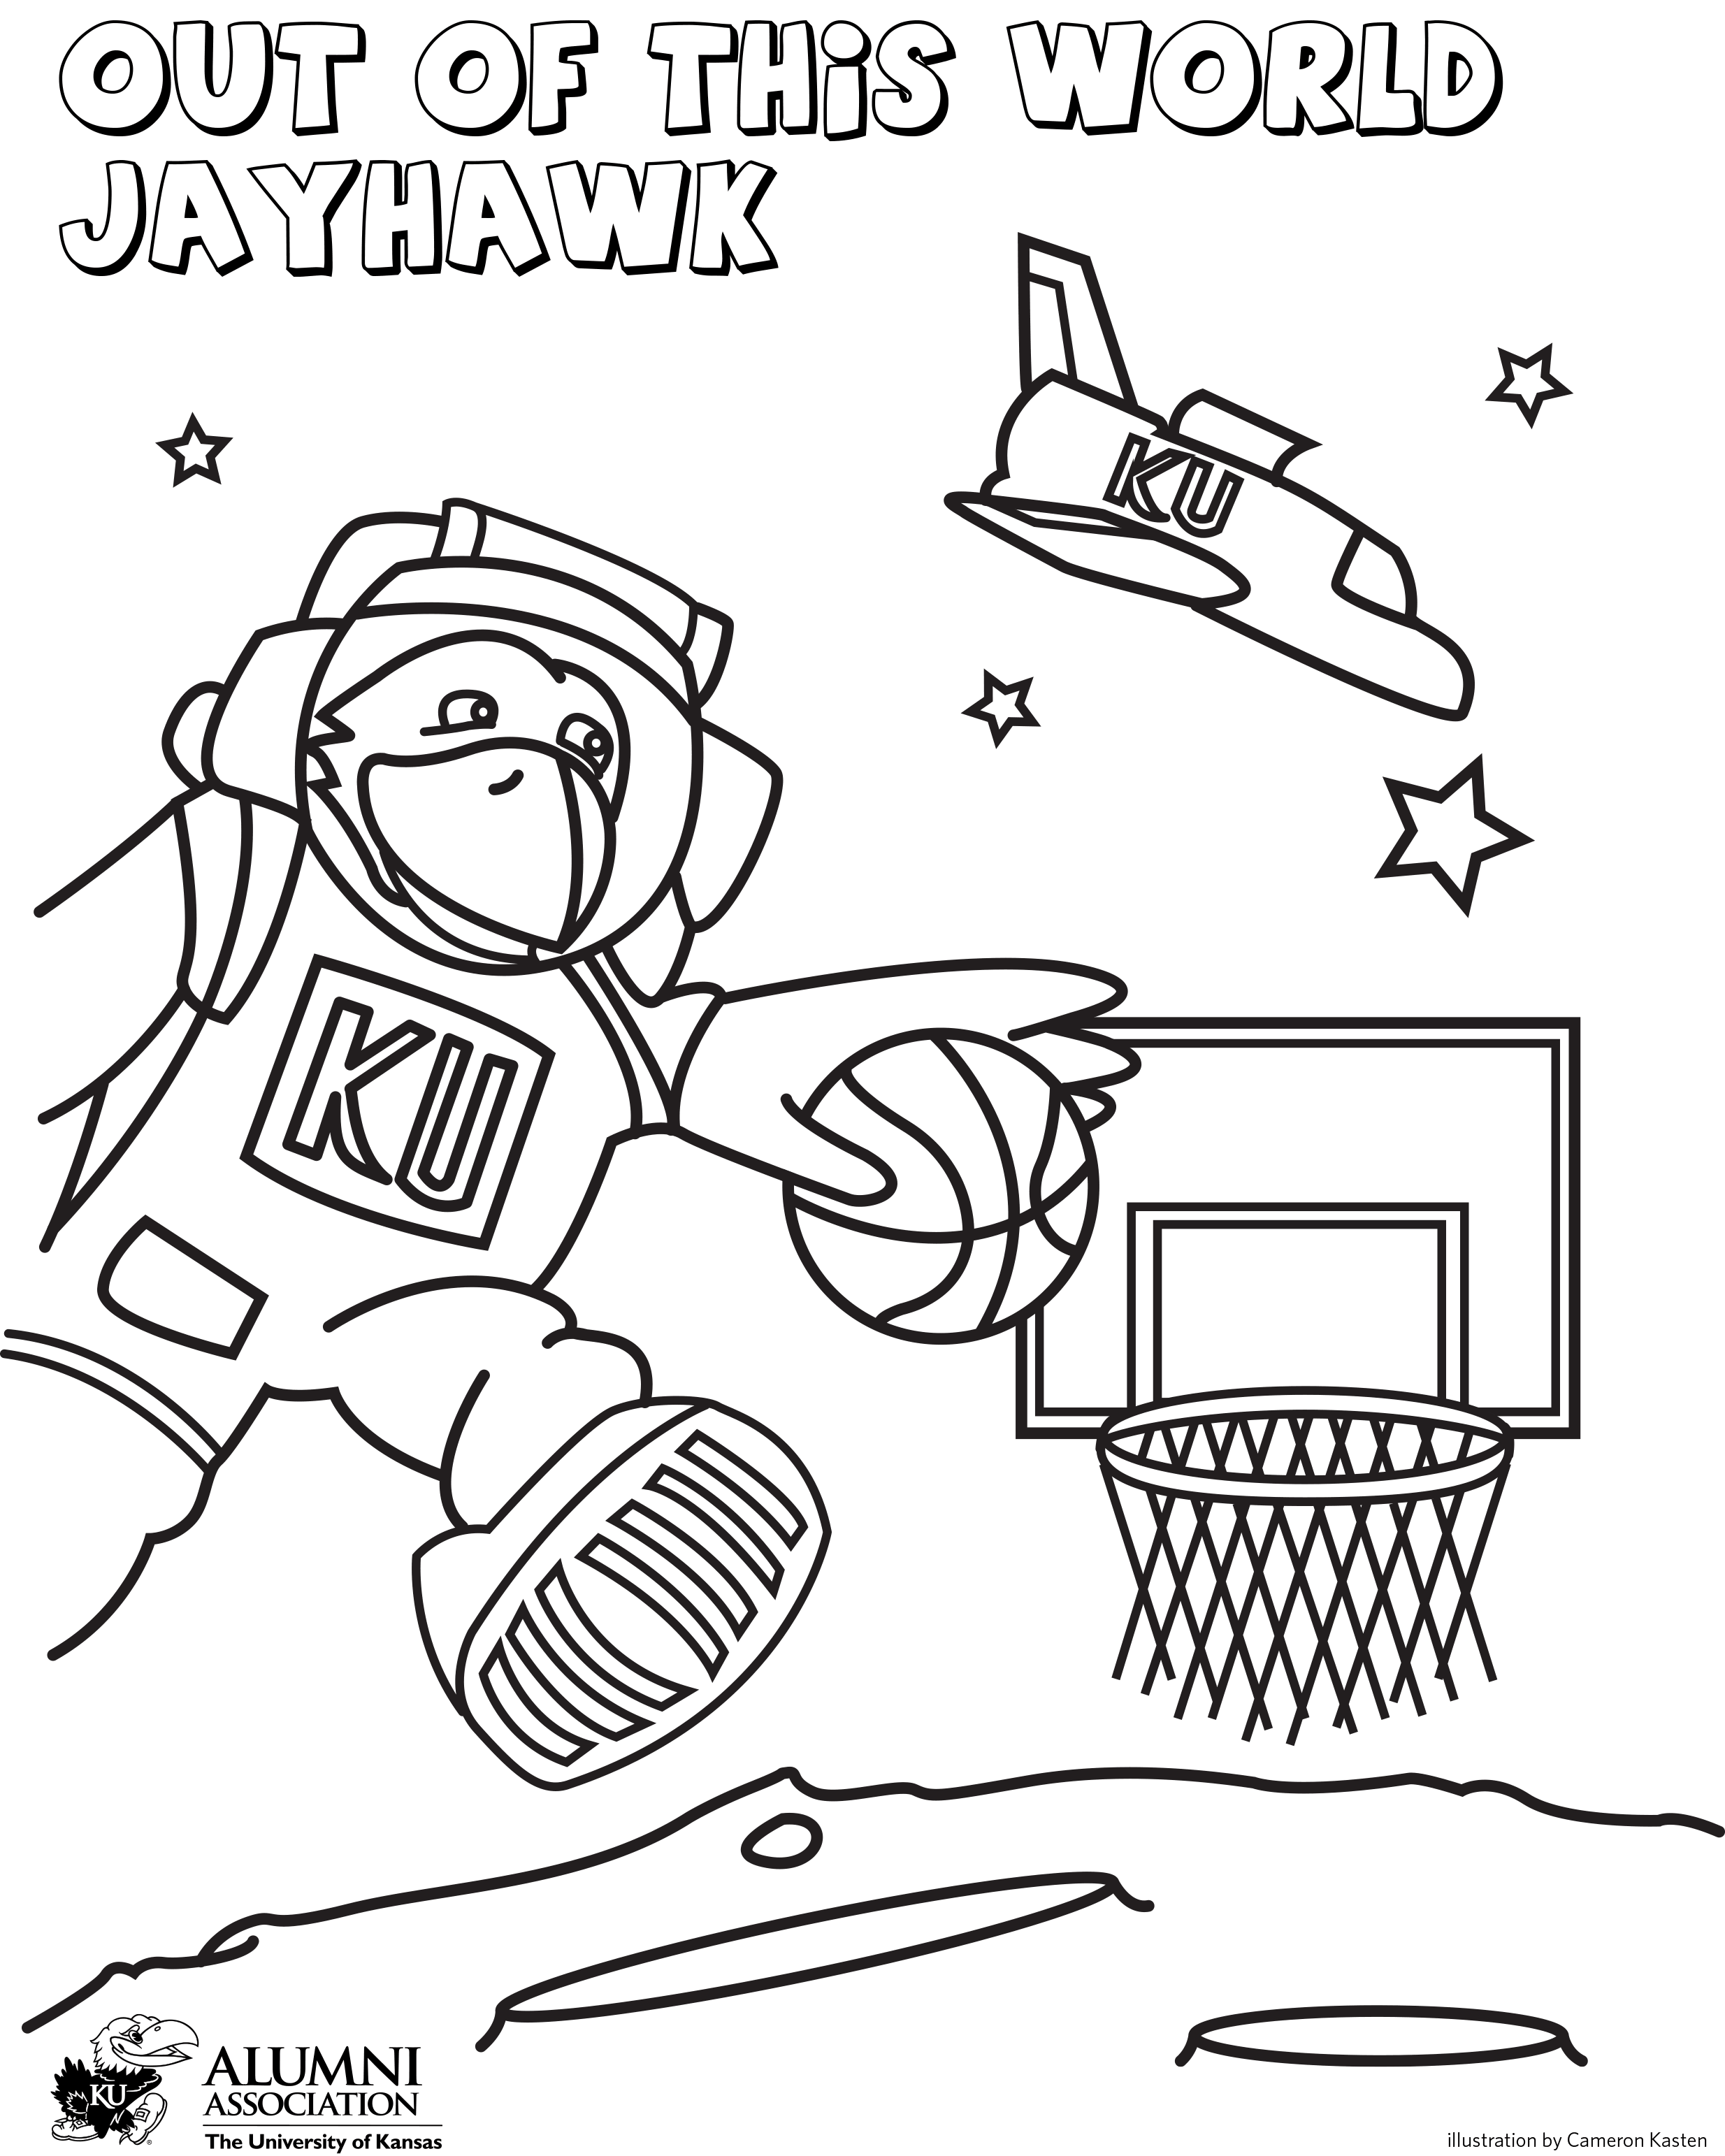 Out of This World Jayhawk - KU coloring page